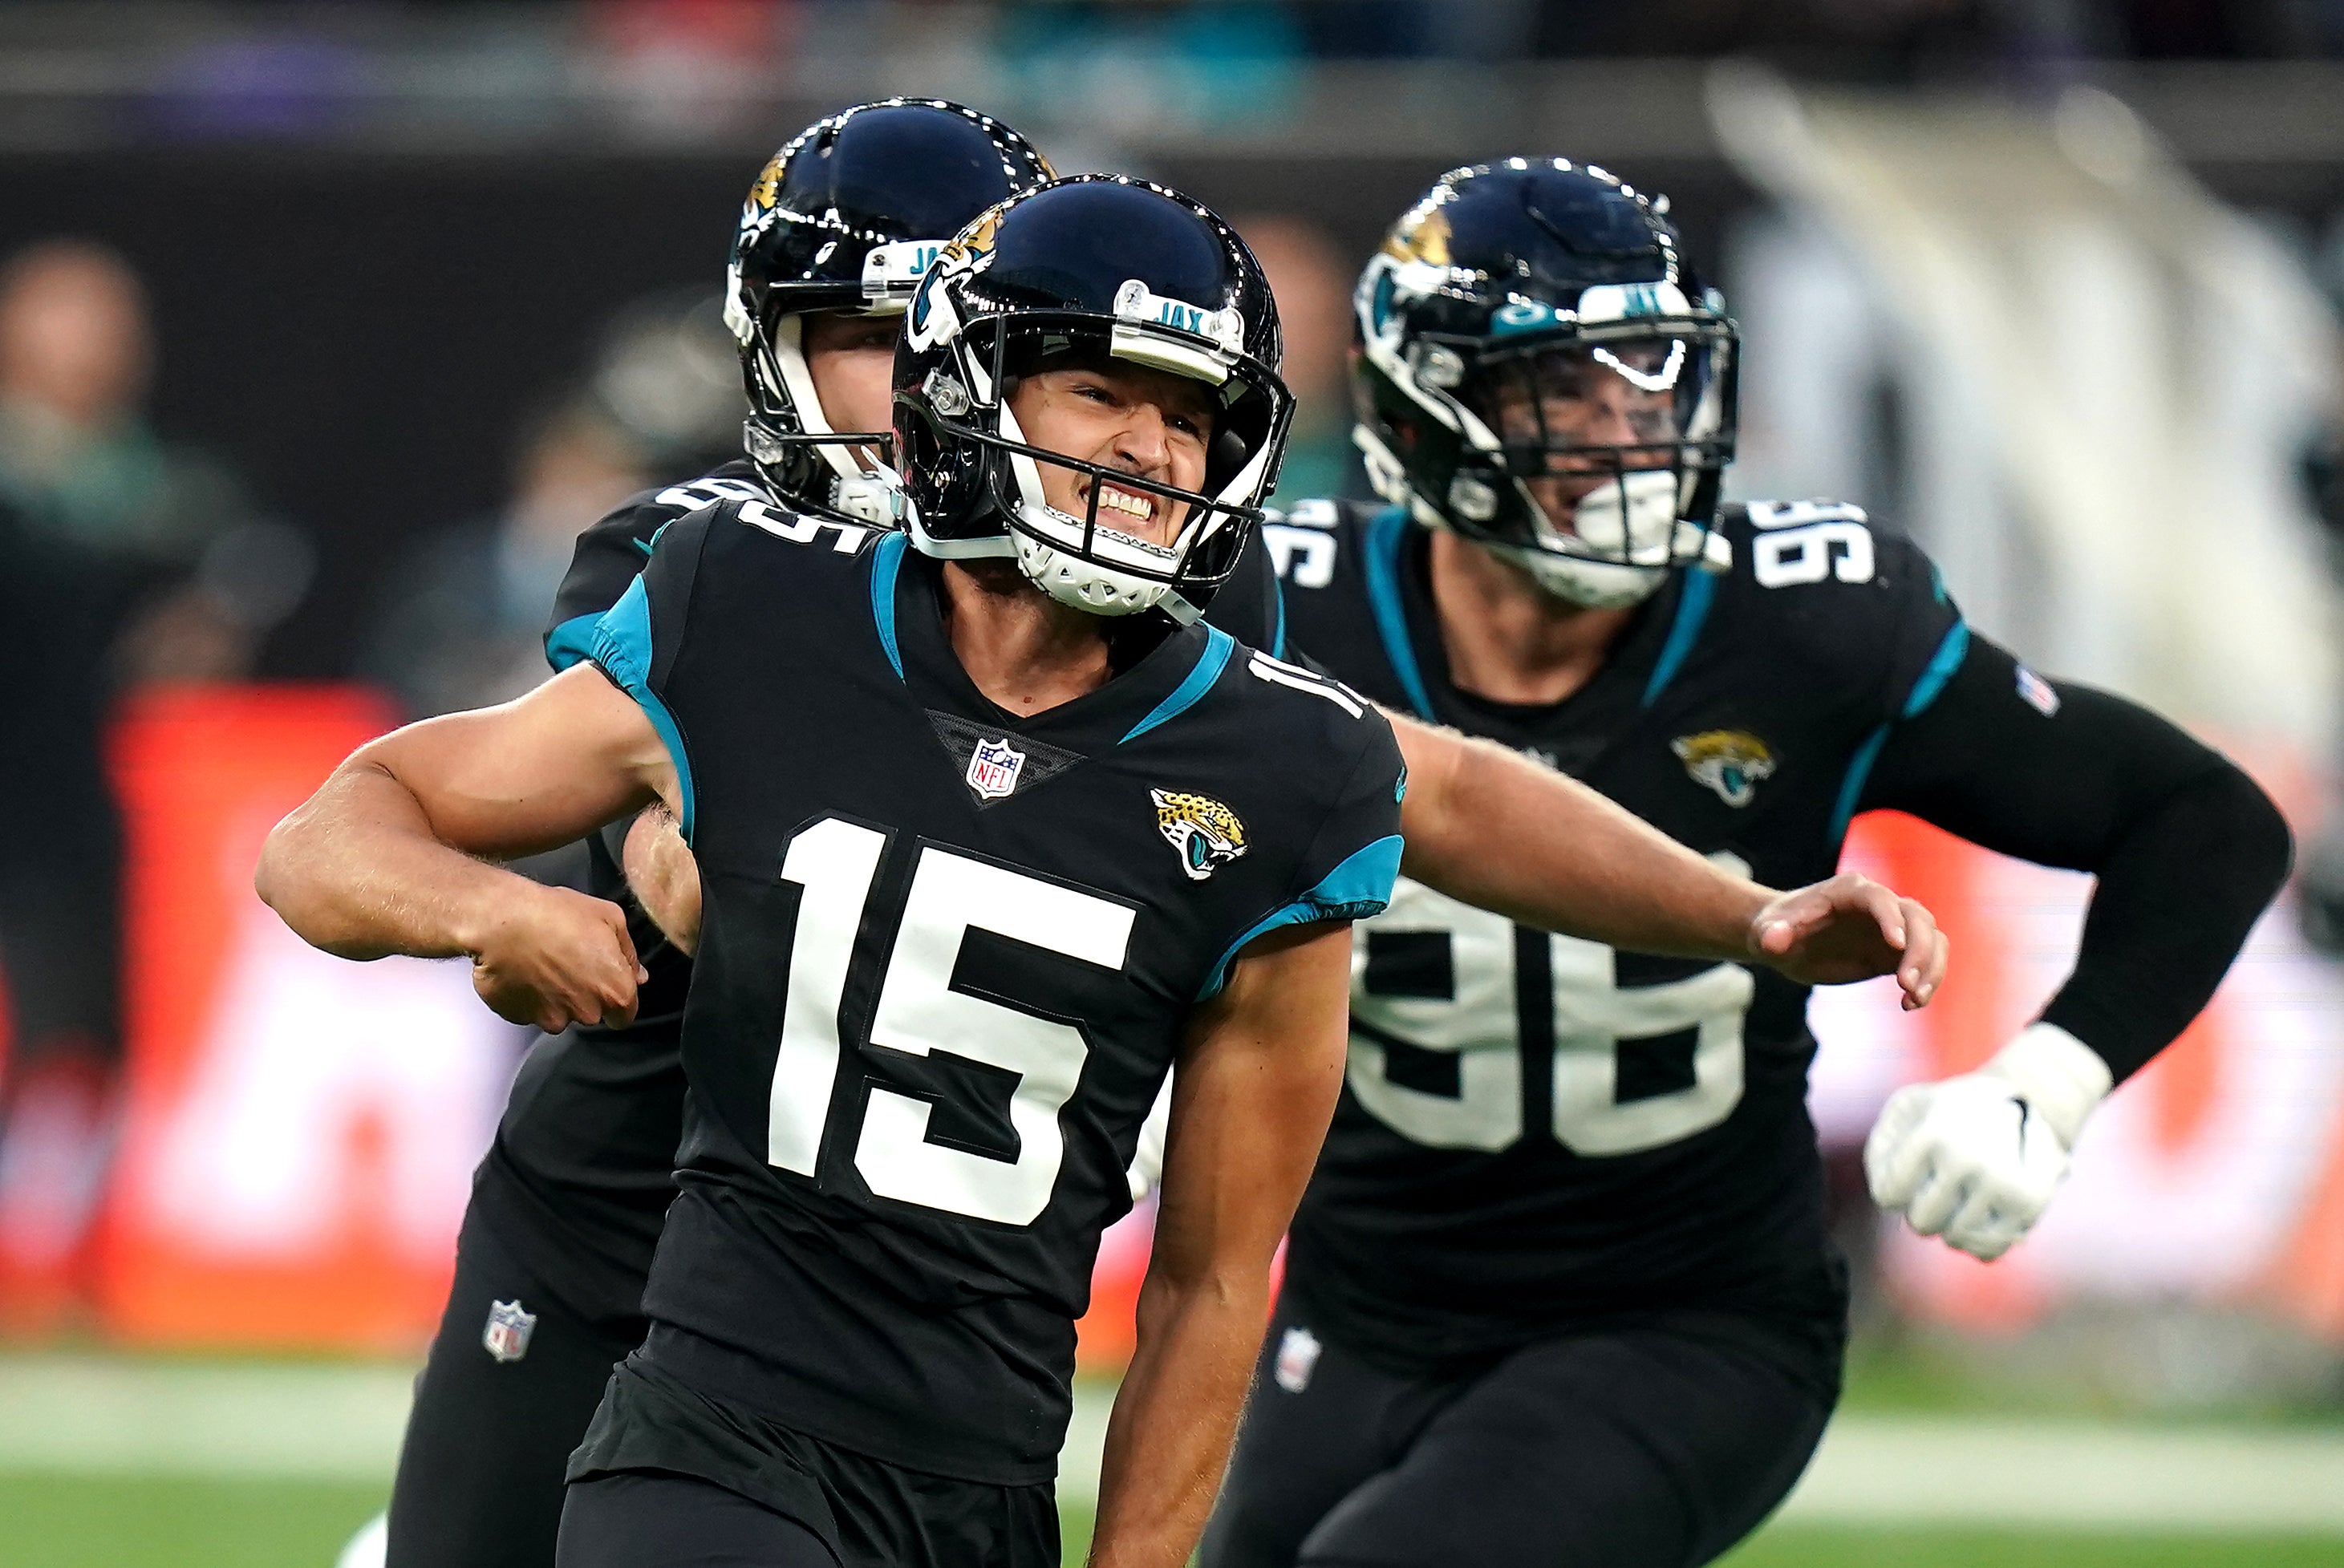 Matthew Wright's field goal double snatches Jacksonville victory